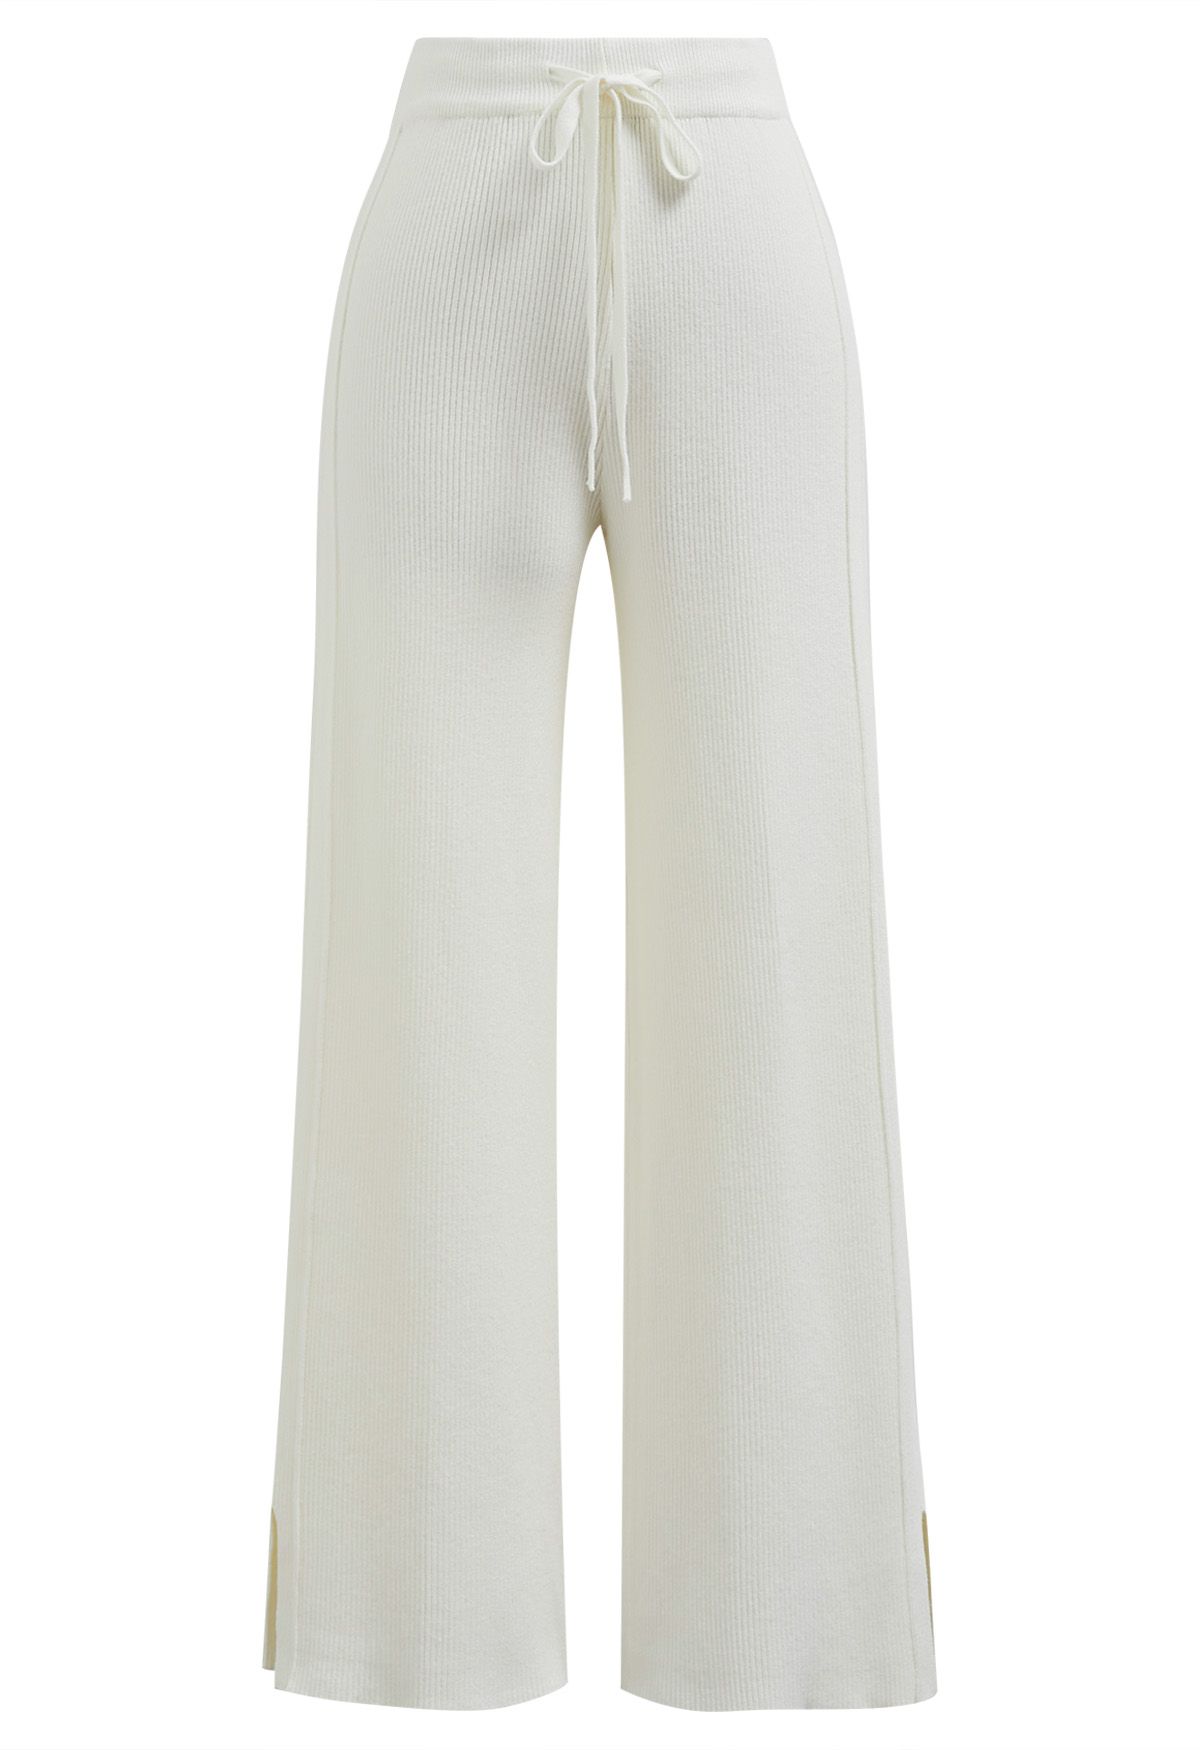 Ivory Ankle-length Pants for Women with drawstring Waist and Lace